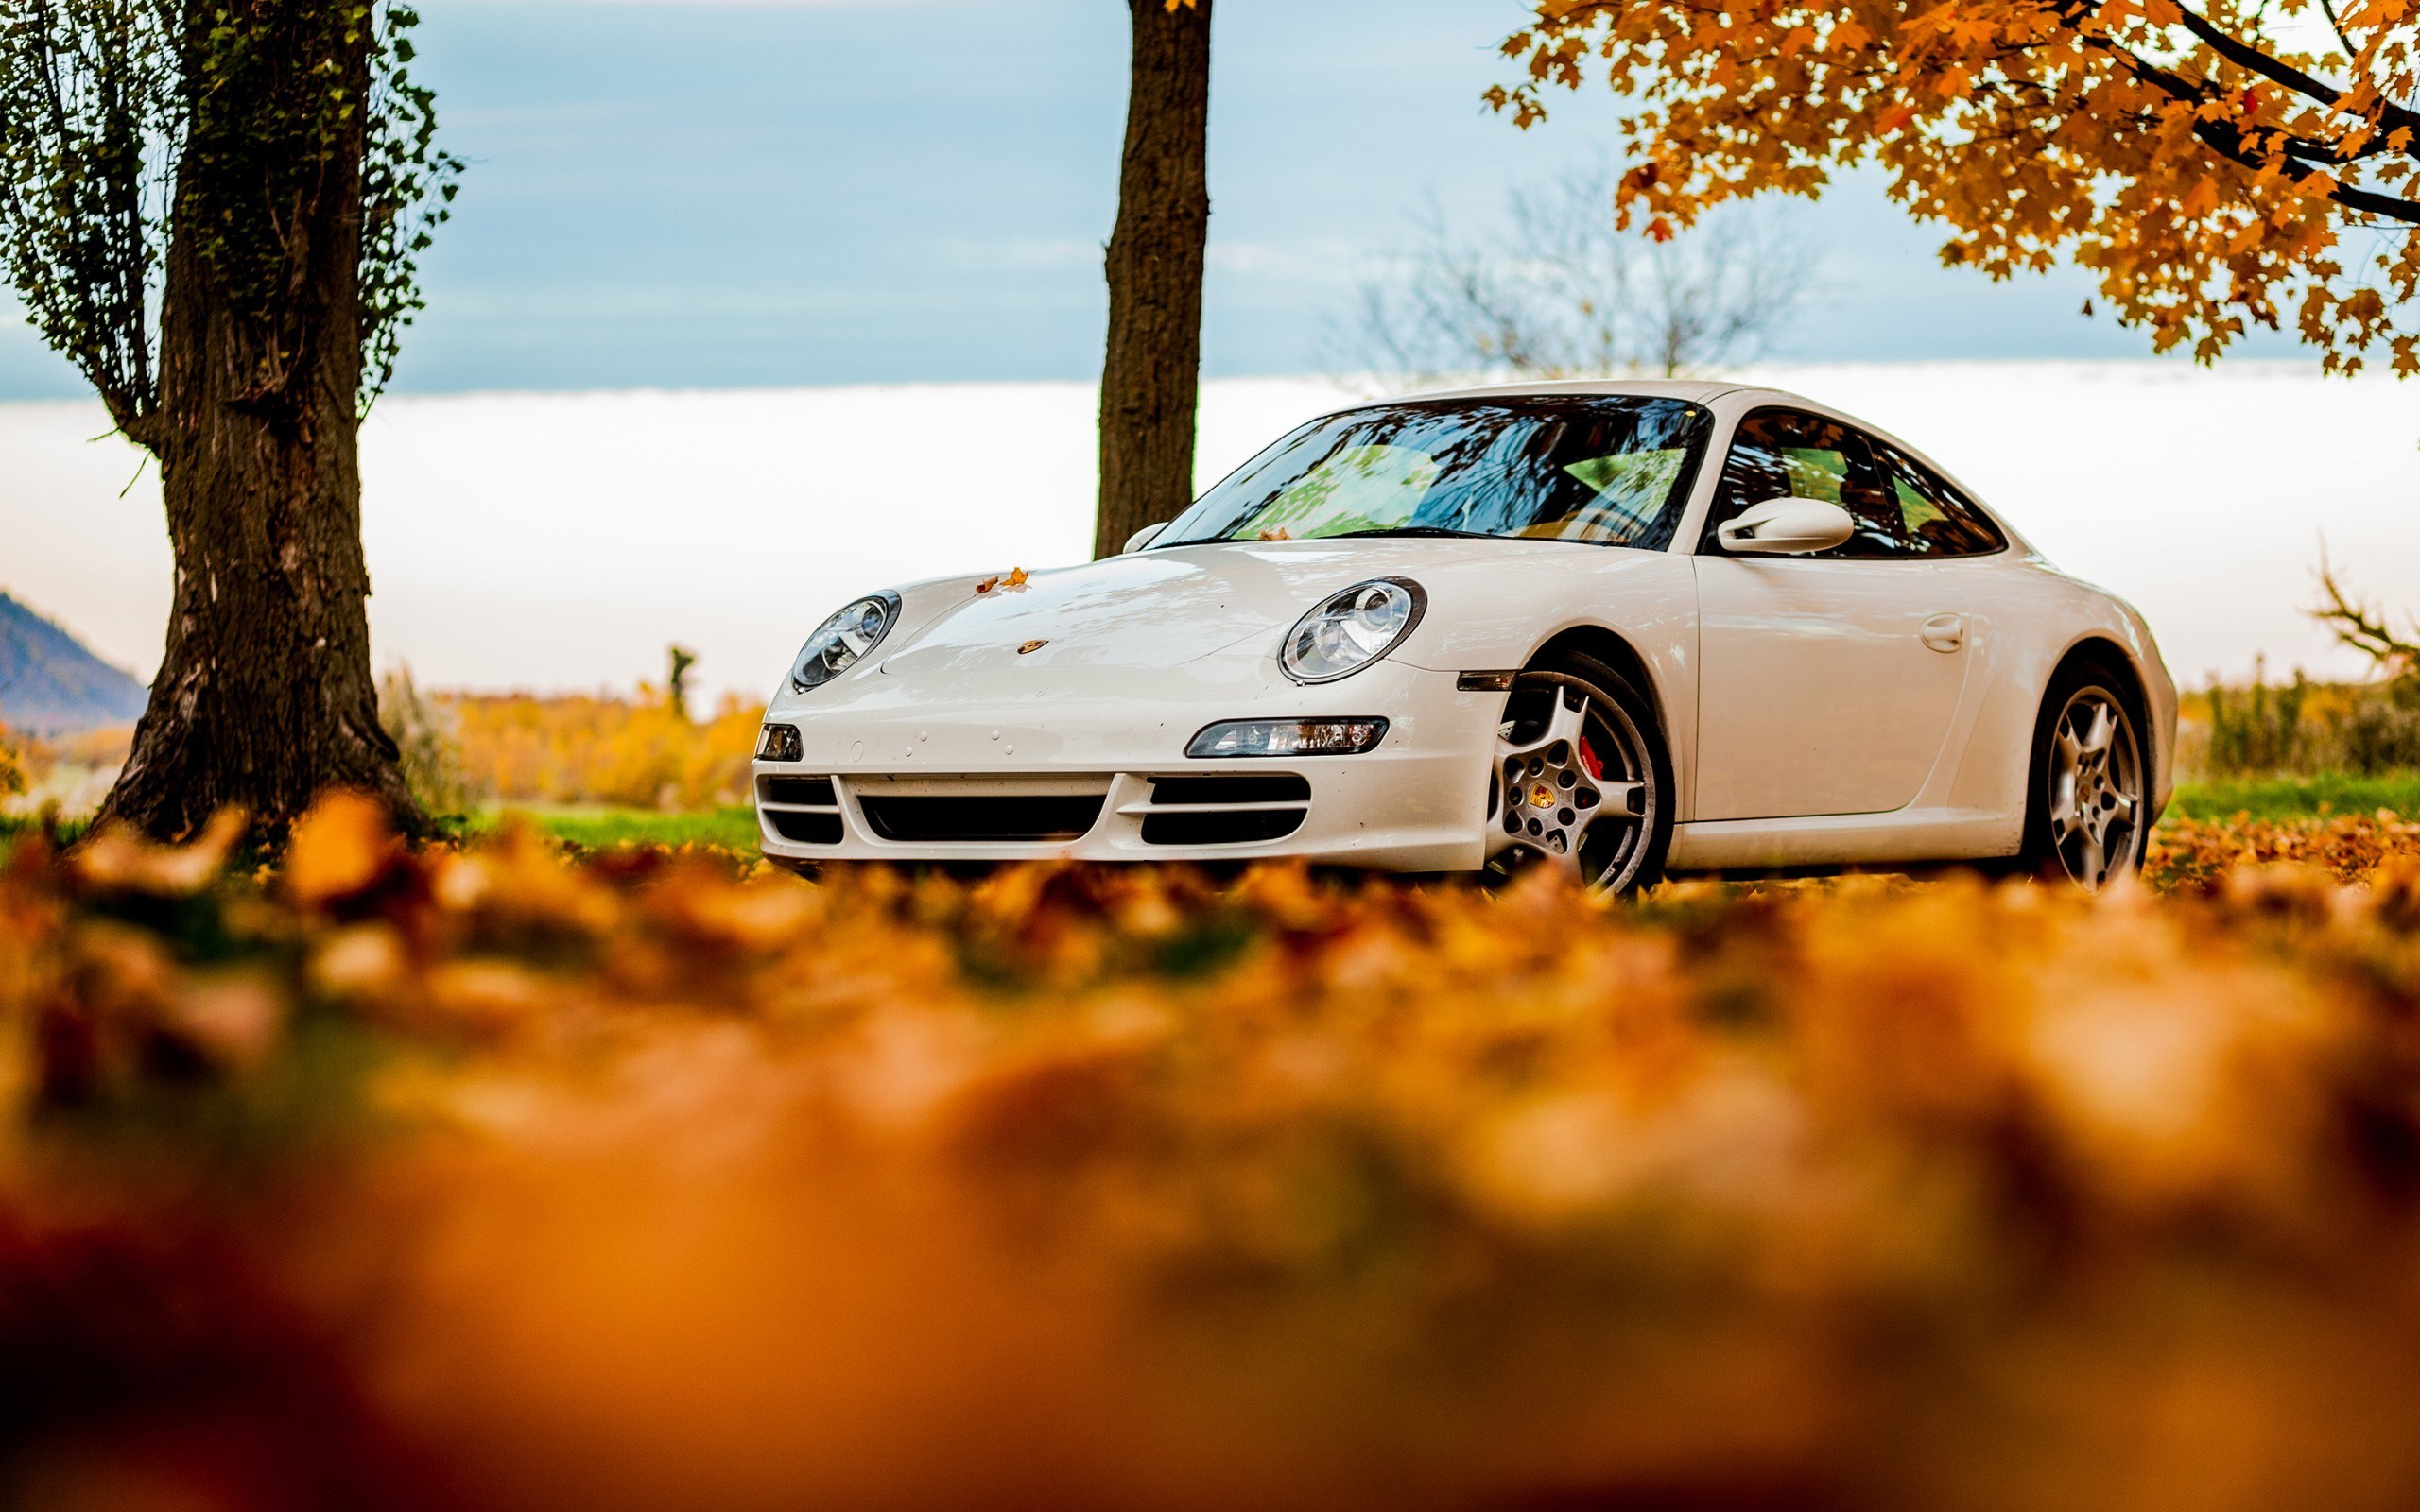 2560x1600 170+ Porsche 911 HD Wallpapers and Backgrounds